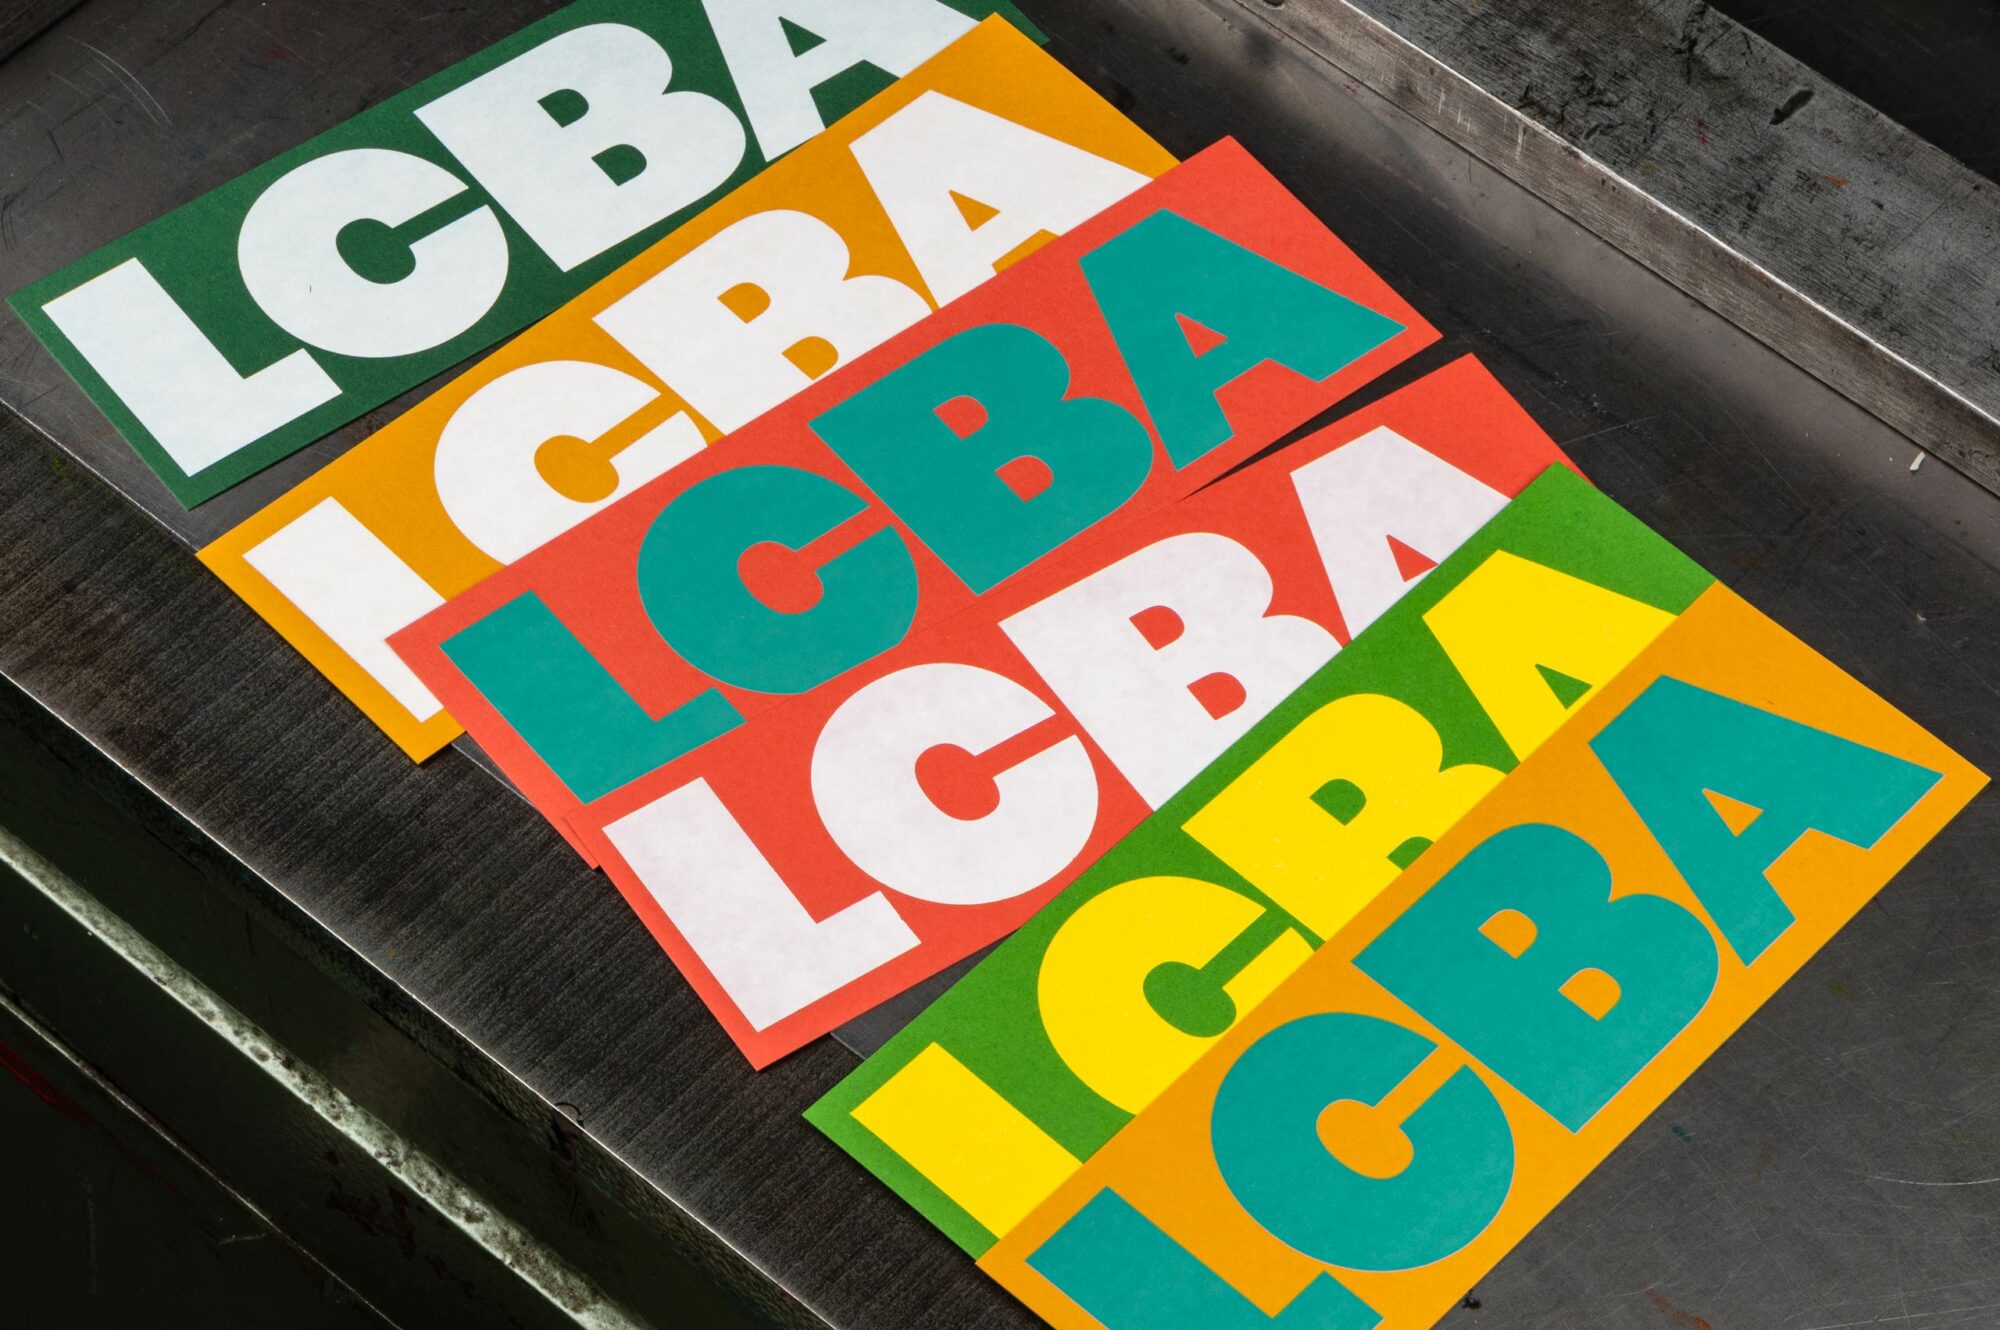 New logotype and multi-coloured bookmarks for the London Centre for Book Arts designed by Studio Bergini